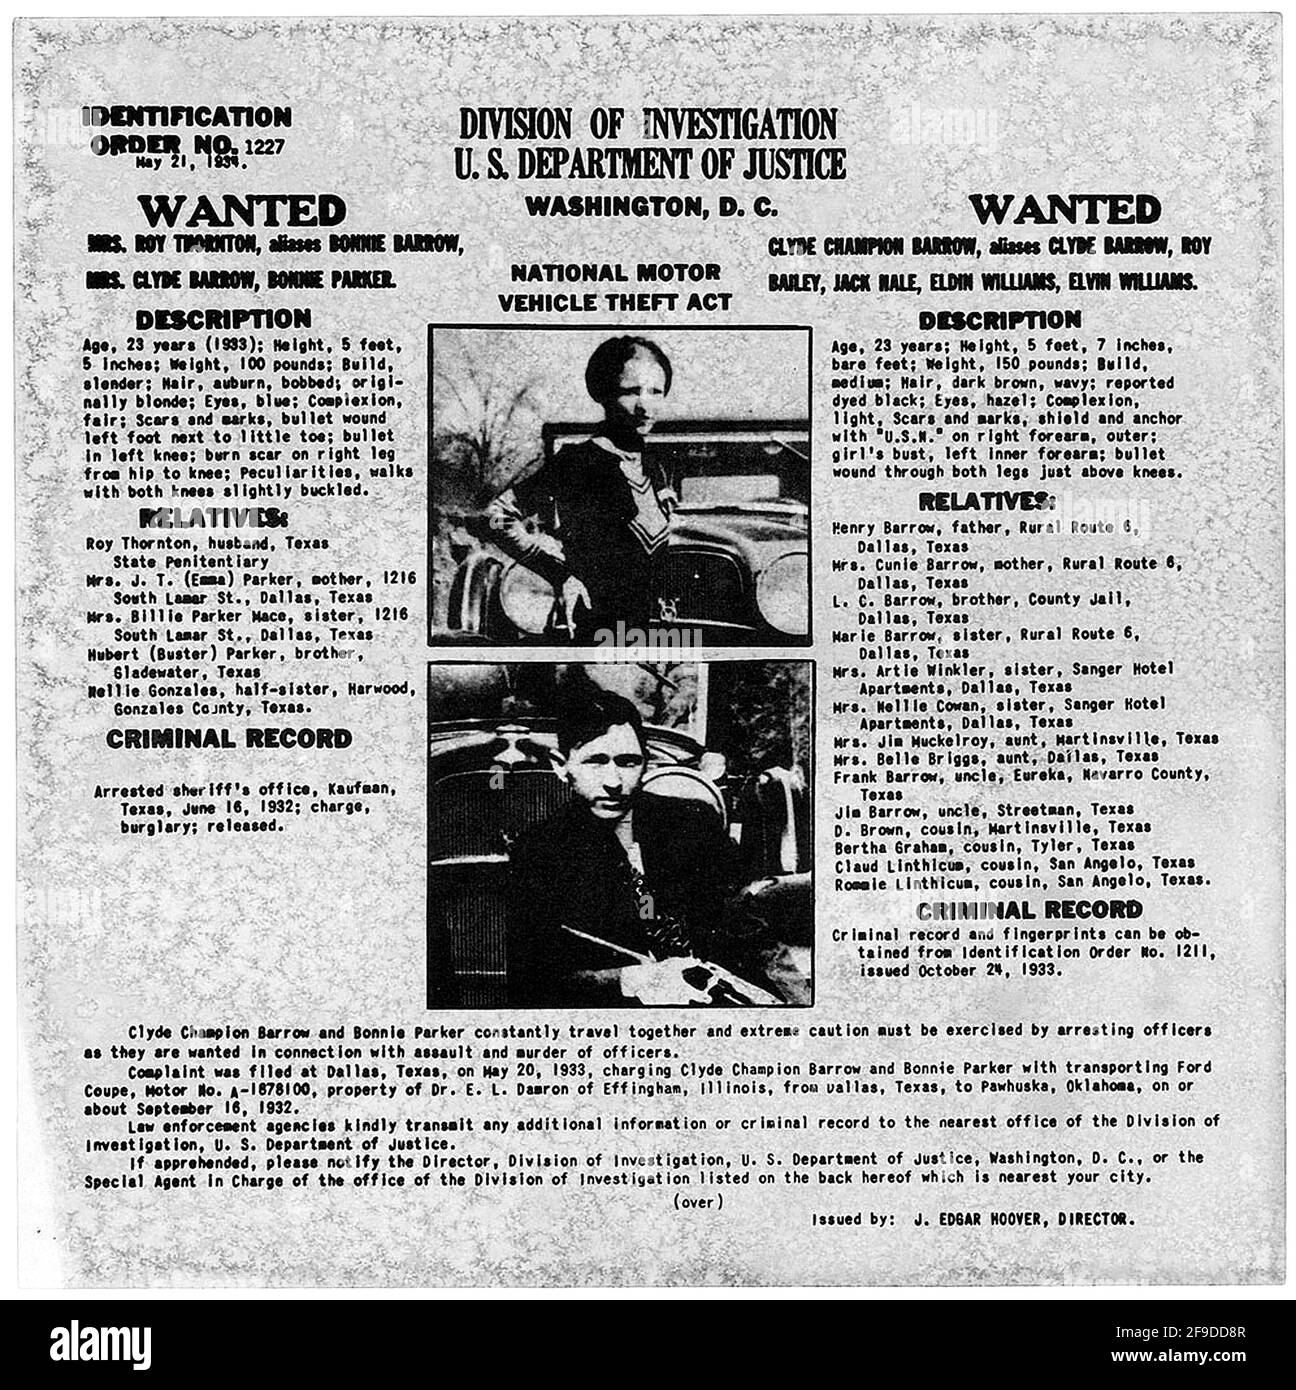 1934 , Arkansas , USA : The Wanted Poster for the famous gangsterns couple  BONNIE PARKER  ( 1910 - 1934 ) and CLYDE BARROW ( 1909 - 1934 ). Contrary to popular belief the two never married. They were in a long standing relationship. Posing in front of a 1932 Ford V8 automobile. Recovered from Bonnie and Clyde after their deaths on May 23, 1934 . Unknown photographer . - OUTLAWS - KILLER - ASSASSINO - delinquente - criminalità organizzata  - GANGSTERN - Bos - CRONACA NERA - CRIMINALE - car - automobile - hat - cappello - sigaro - fumo - smoke - fumatore - woman smoker - fumatrice - pistola - r Stock Photo